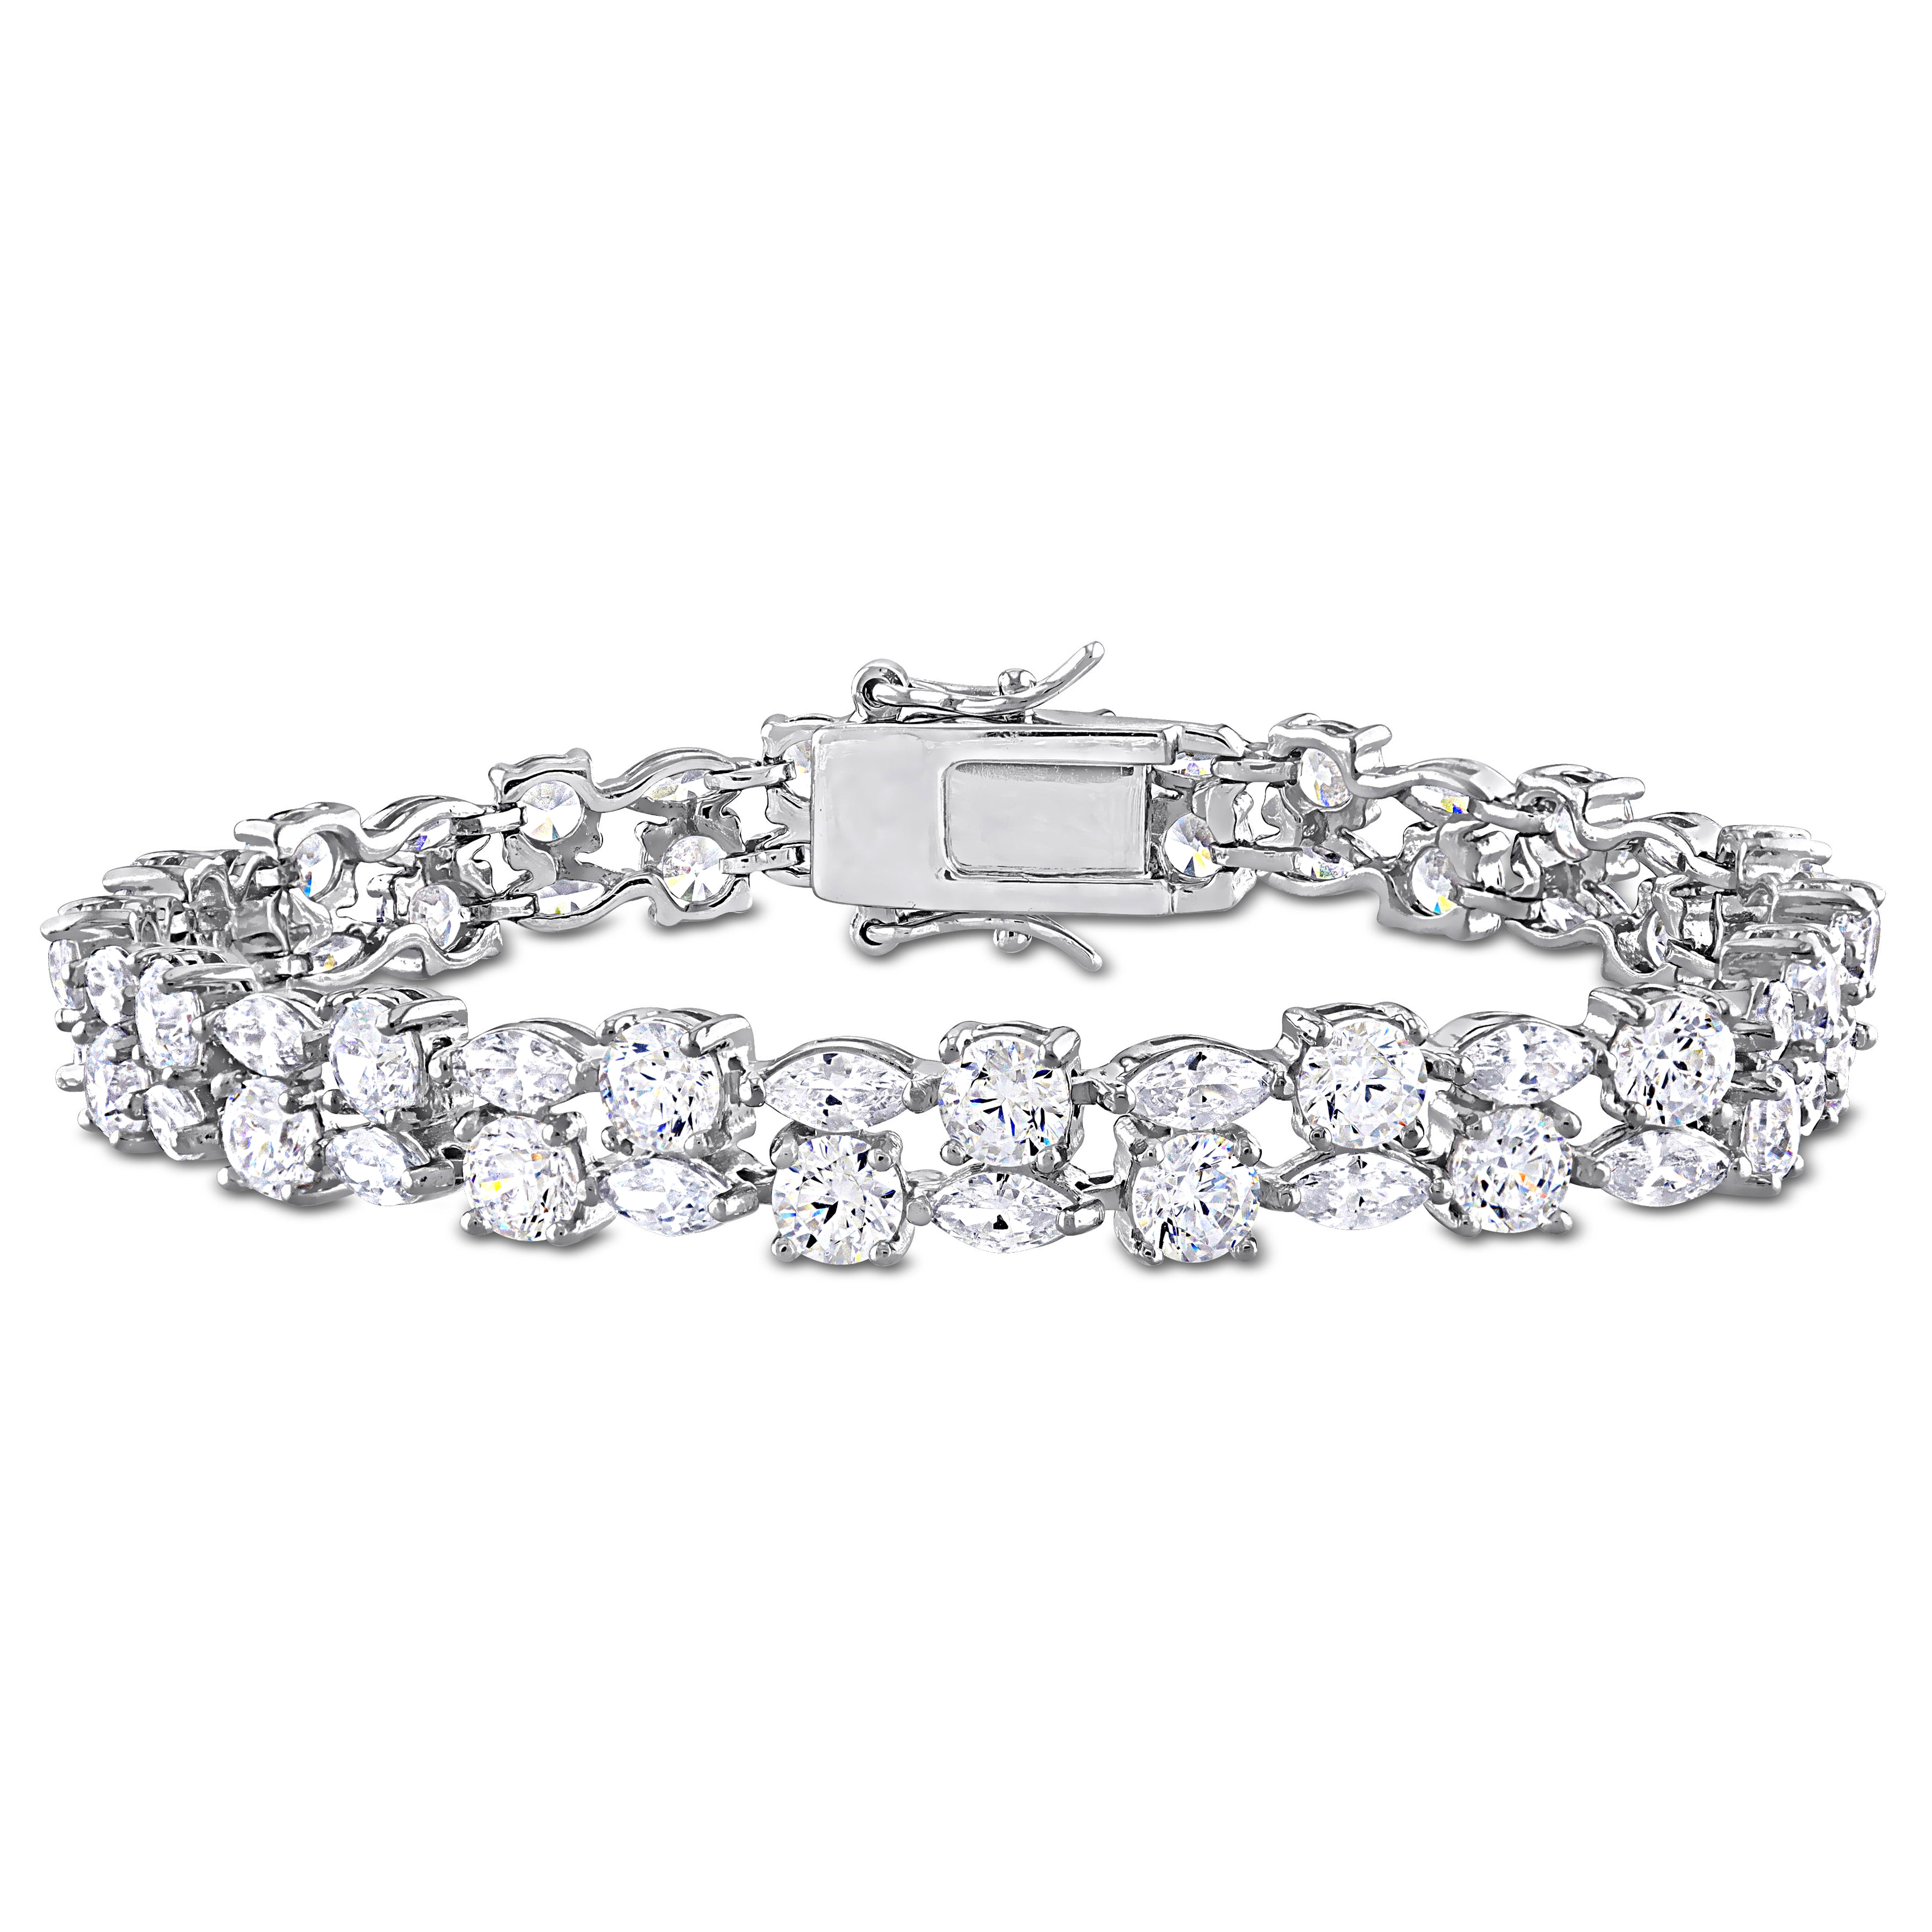 17 5/8 CT TGW Round and Marquise-Cut Created White Sapphire Bracelet in Sterling Silver - 7.25 in.